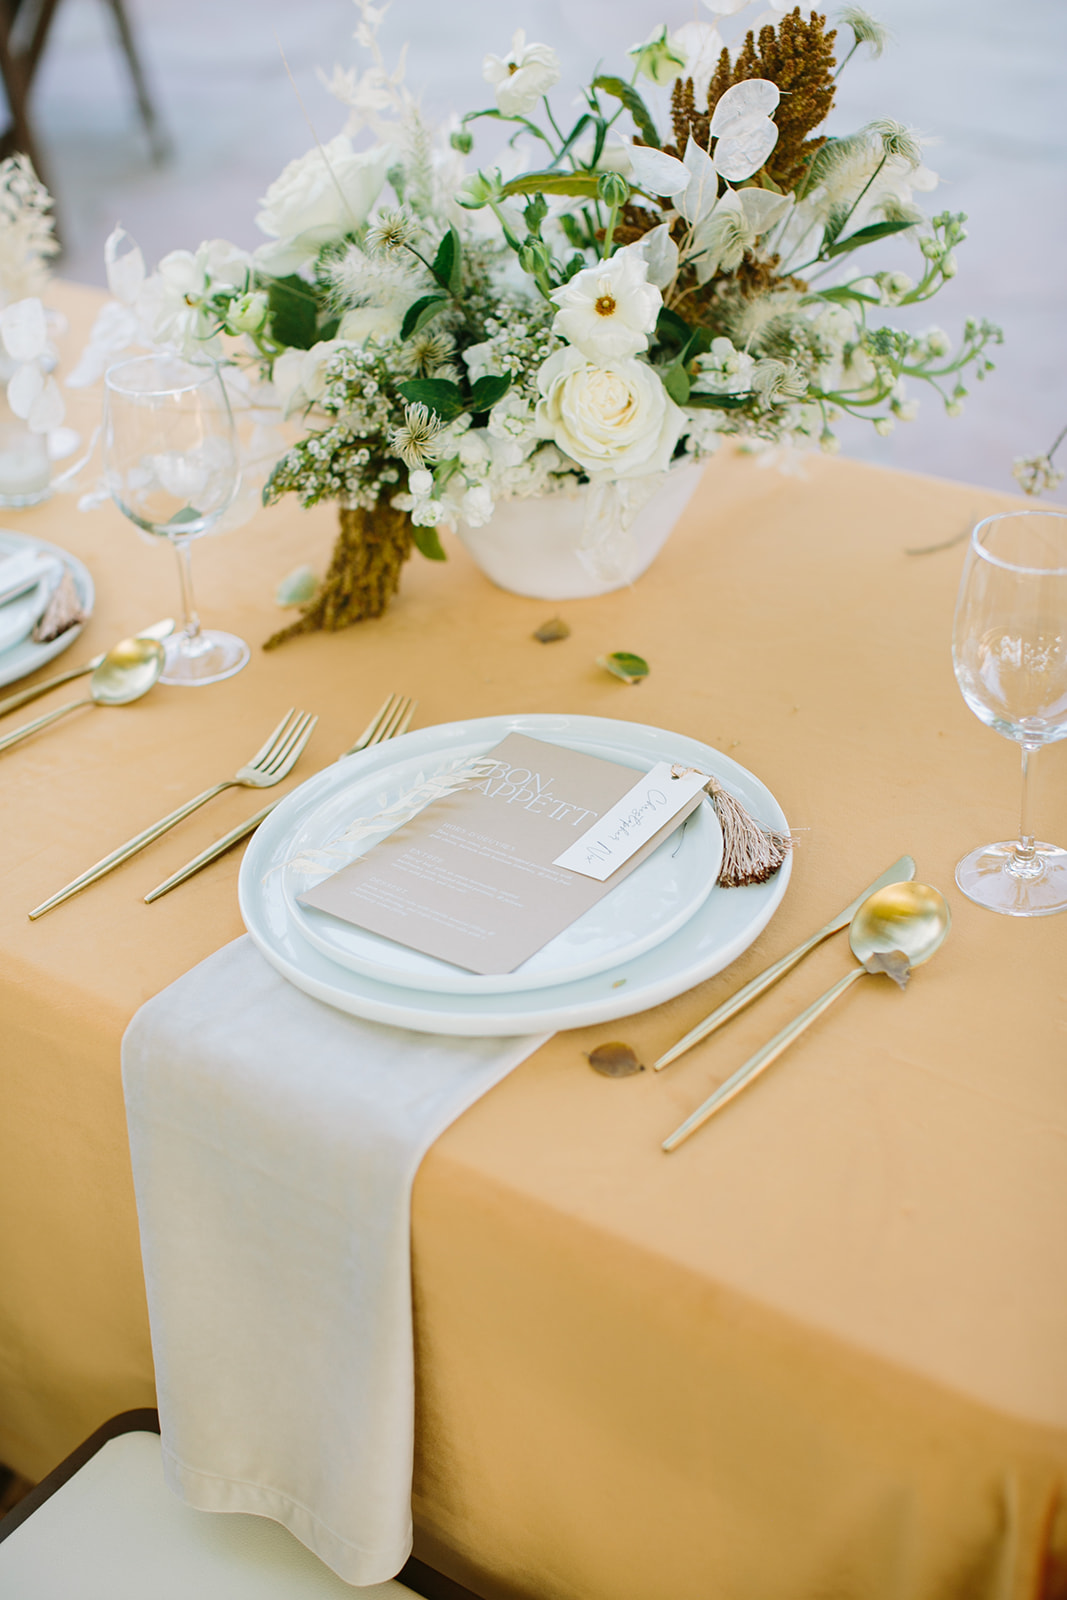 Wedding reception place setting with white plates, gold silverware and mustard linens.